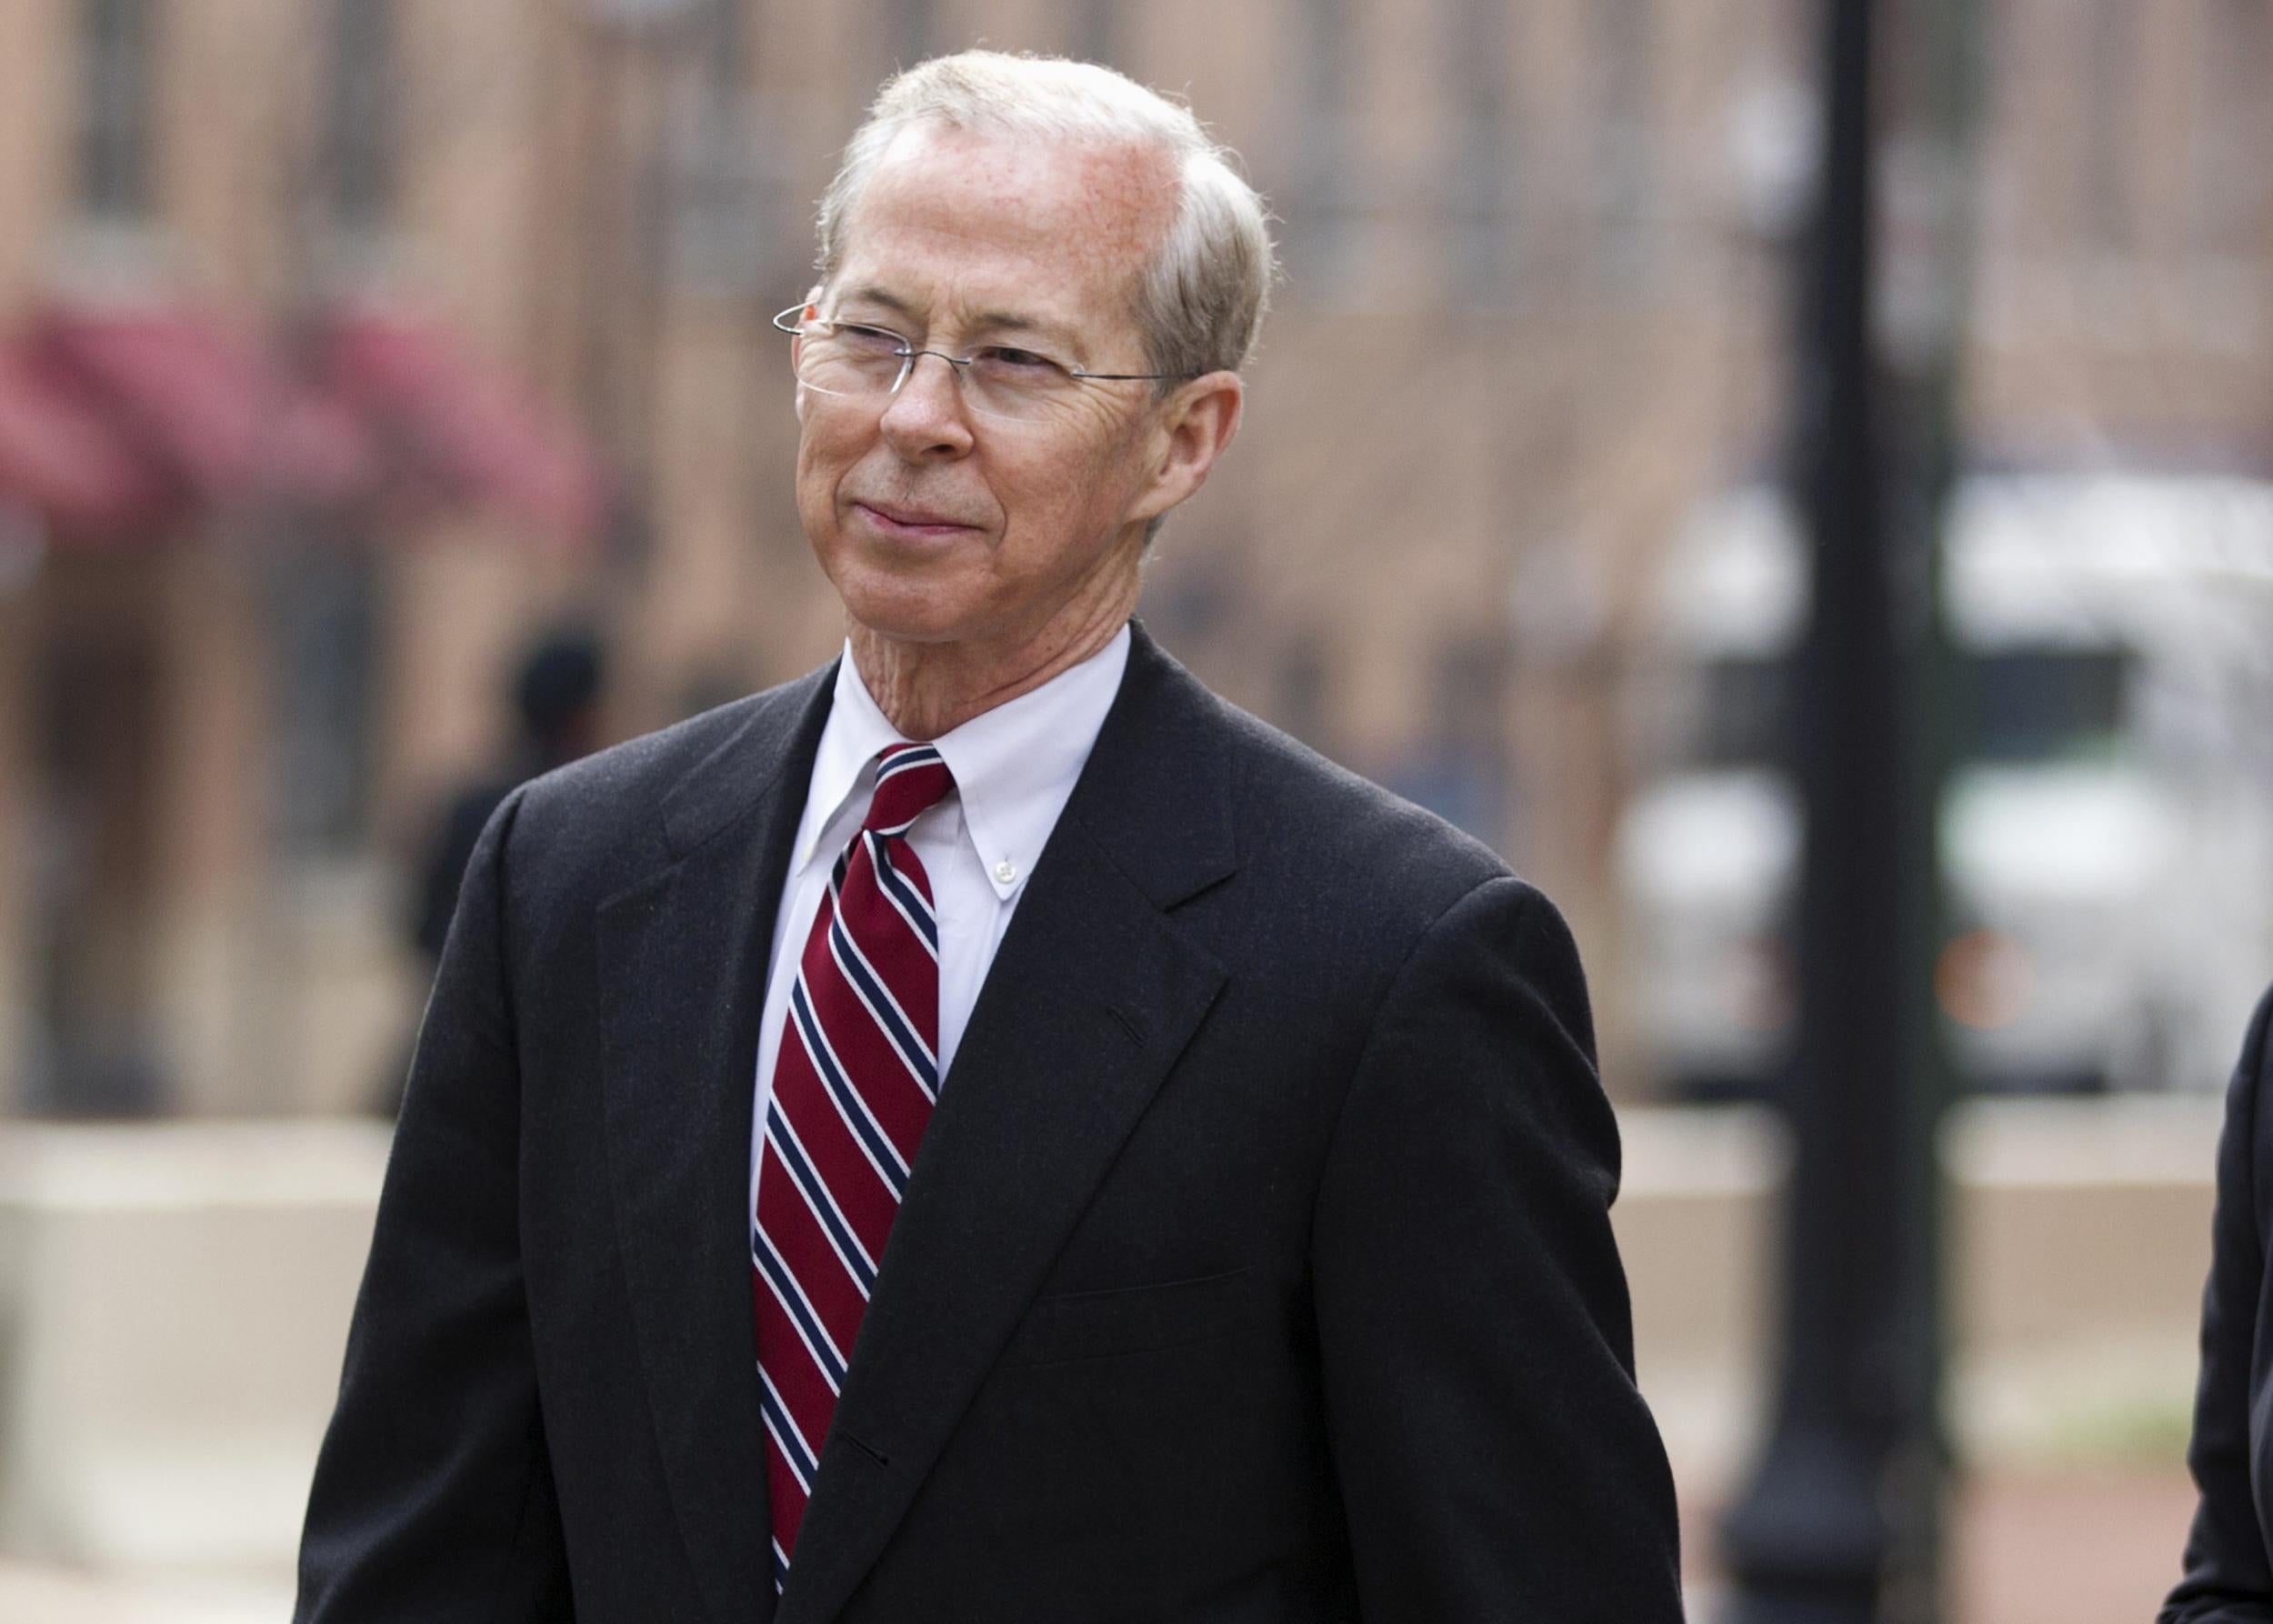 Boente has worked across both Republican and Democrat administrations and said he would defend the latest executive order